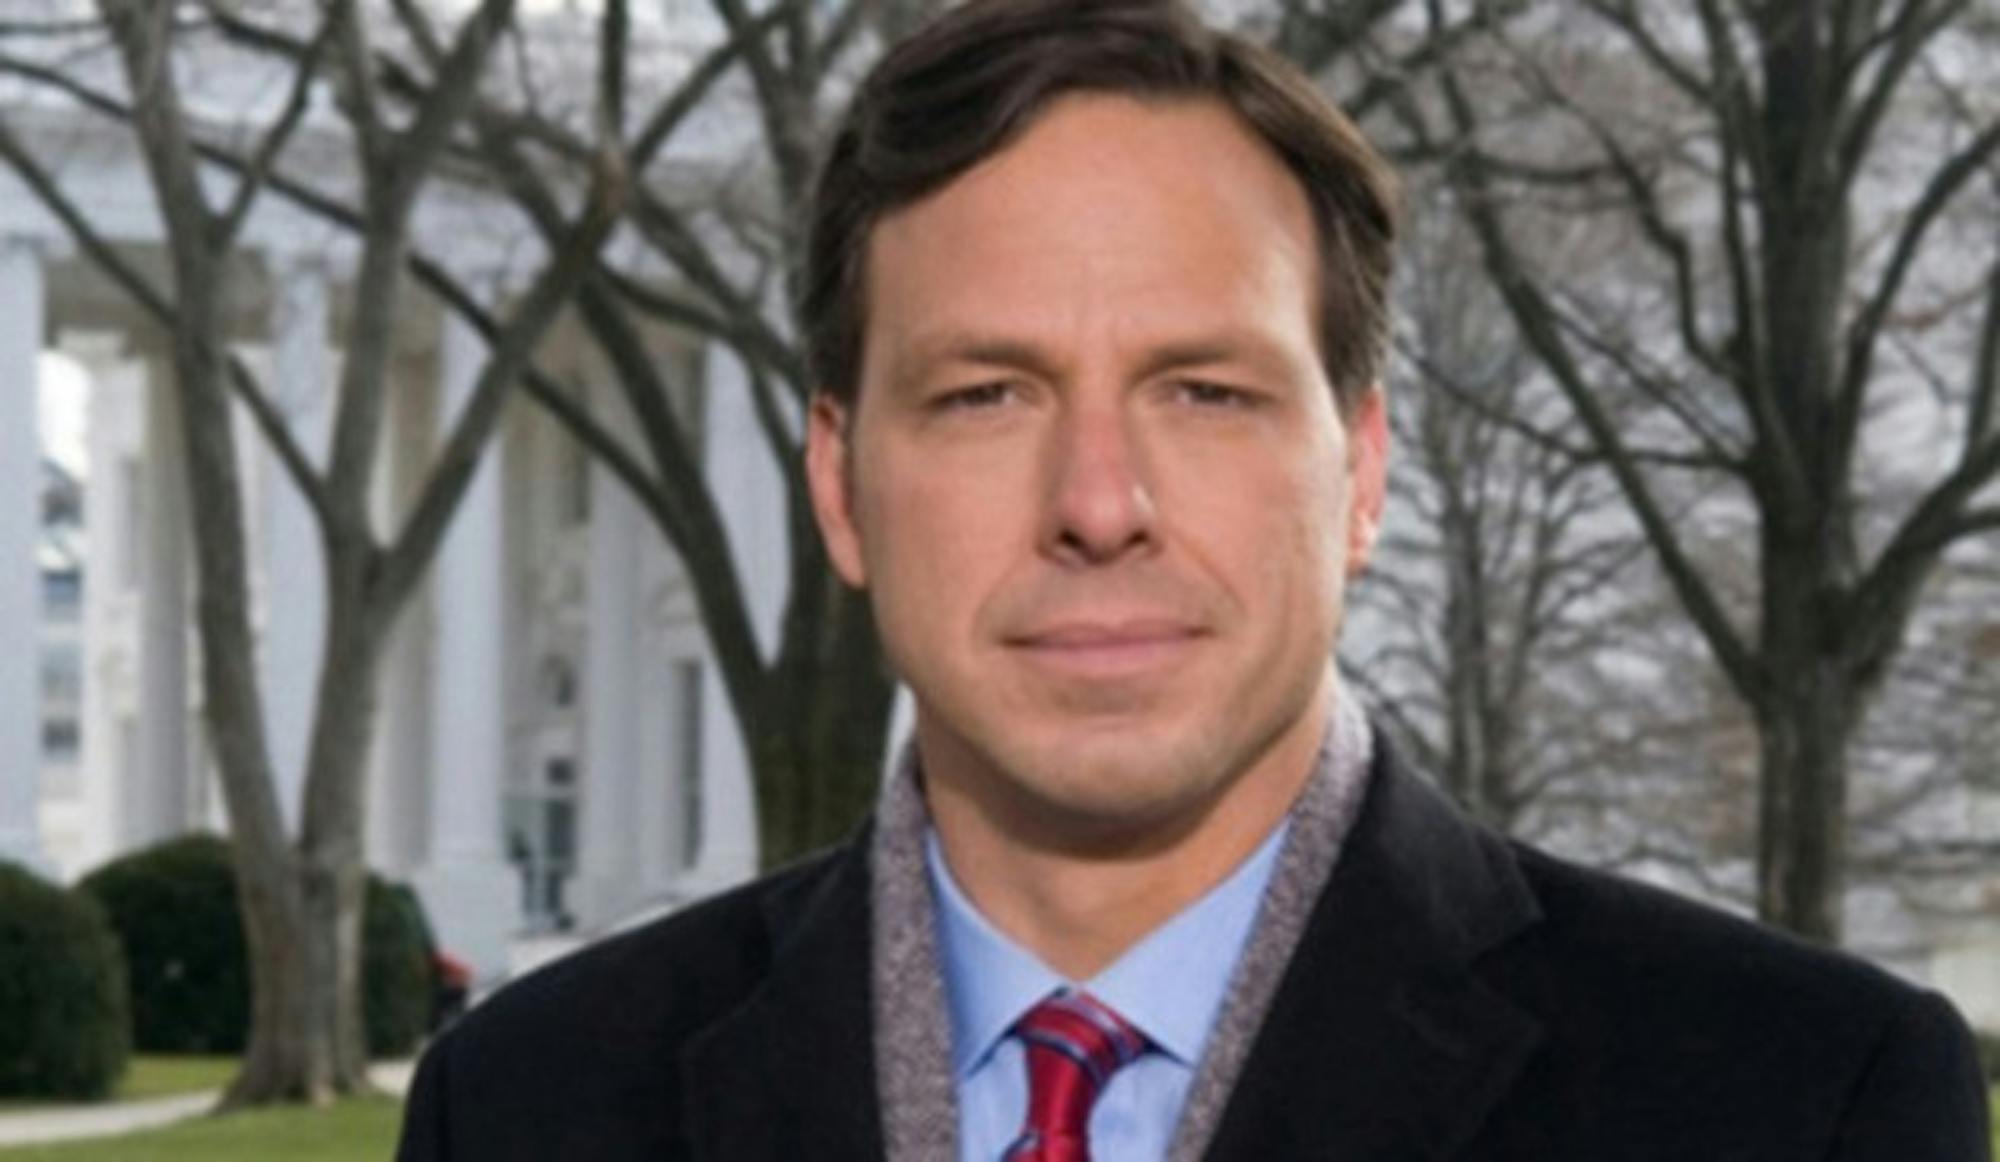 CNN anchor Jake Tapper '91 will discuss his new book on the Afghanistan war today in FIlene Auditorium.